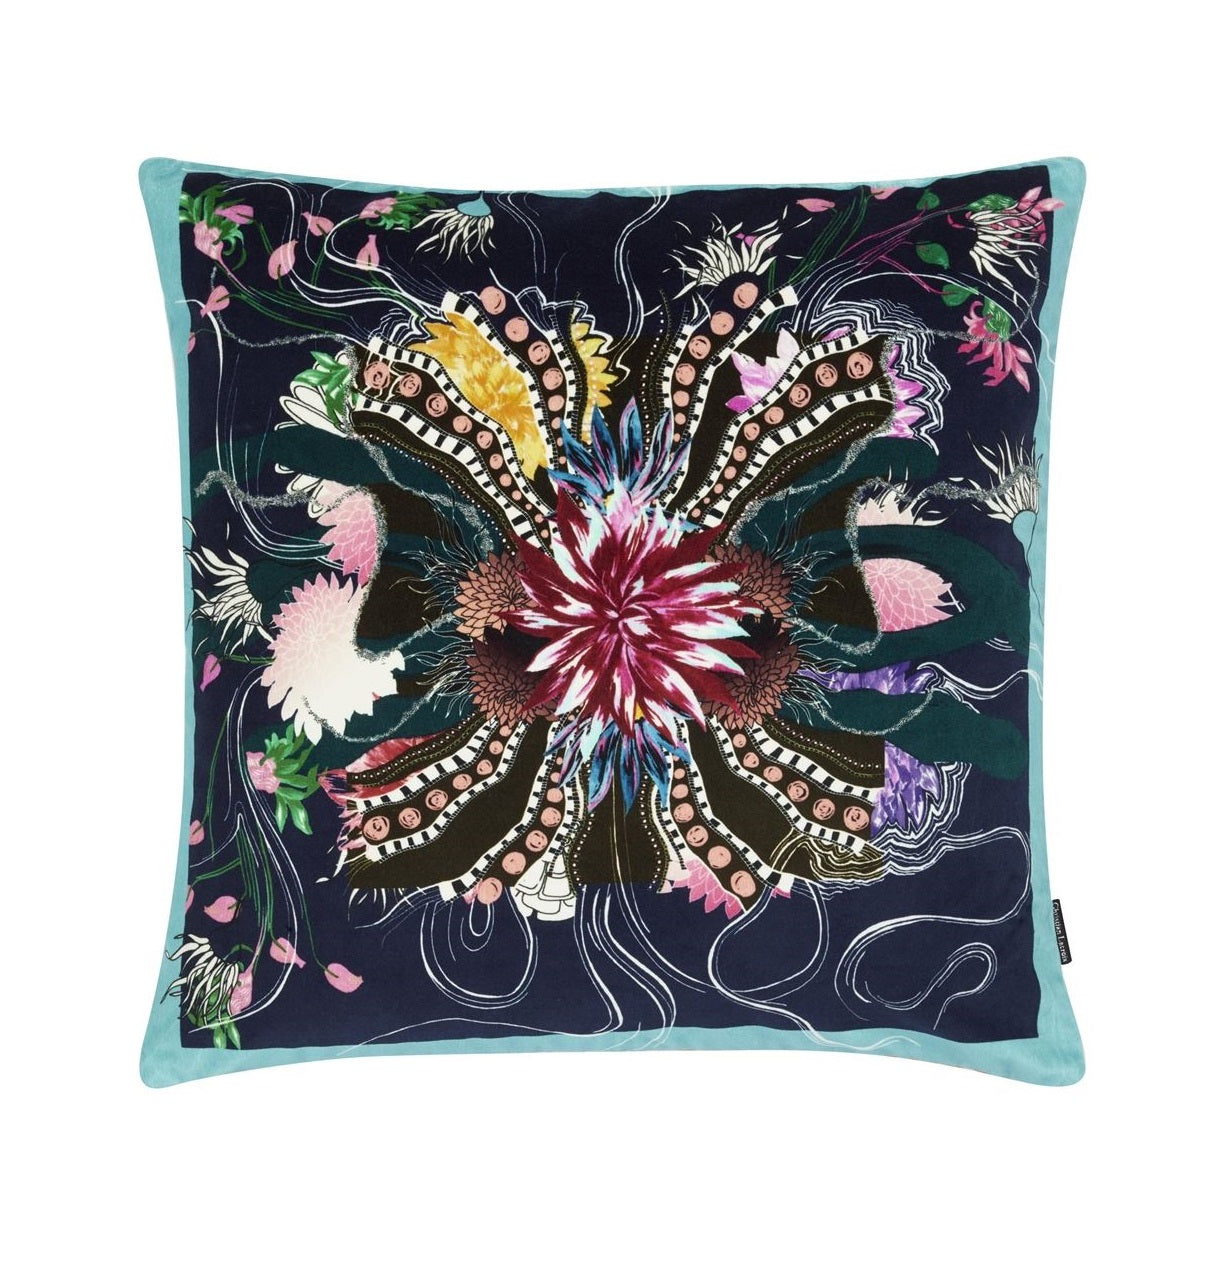 Two-sided pillow OCEAN BLOOMS RUISSEAU cotton satin